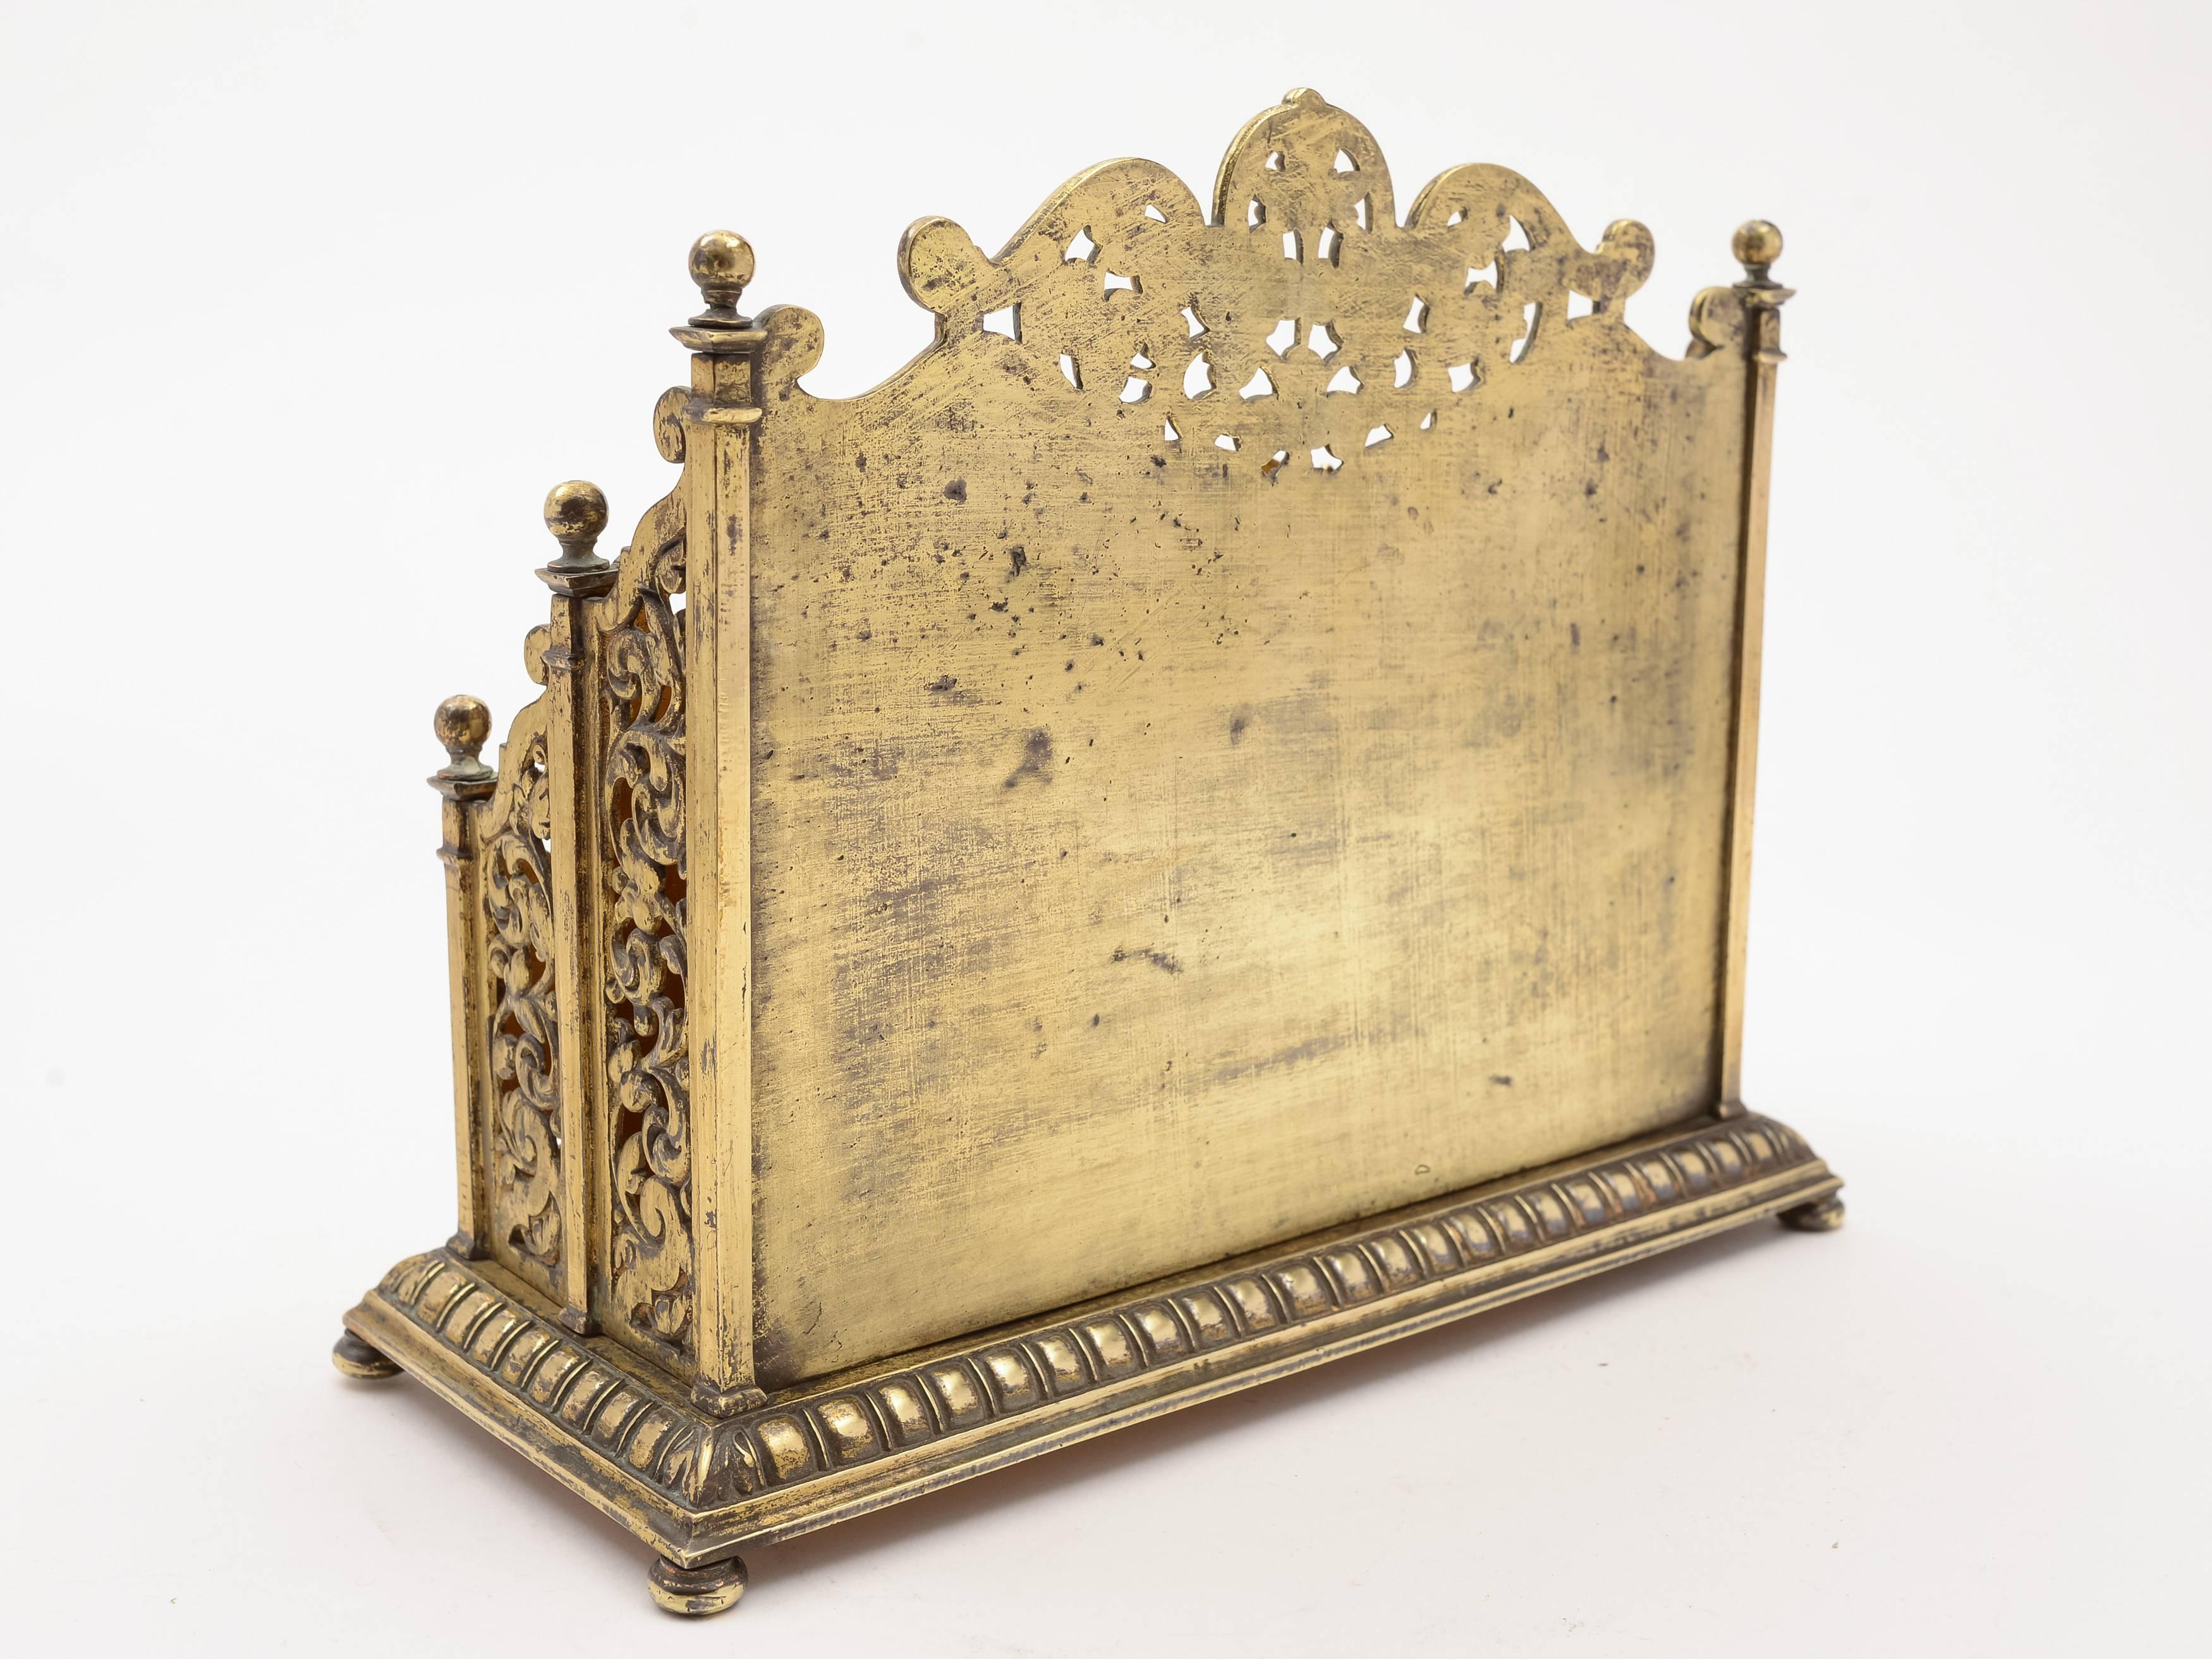 A stunning English Victorian brass letter rack with two compartments. Stands on 4 bun feet and has lovely pierced and embossed decoration, circa 1890.

Measurements: 
Height: 8